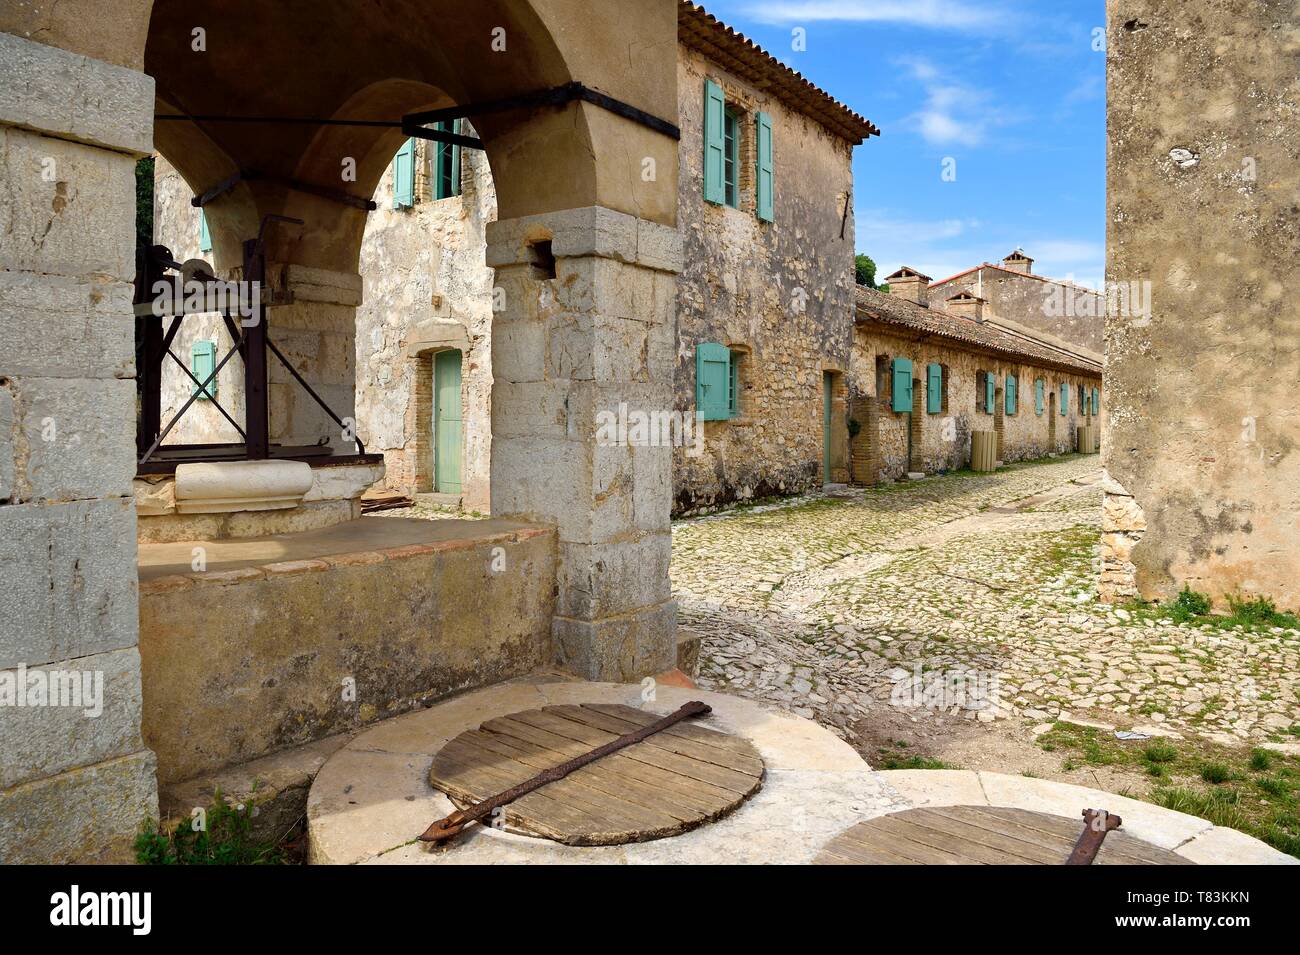 France, Alpes Maritimes, Lerins Islands, Sainte Marguerite island, the Fort Royal fortified by Vauban, the well and a street Stock Photo